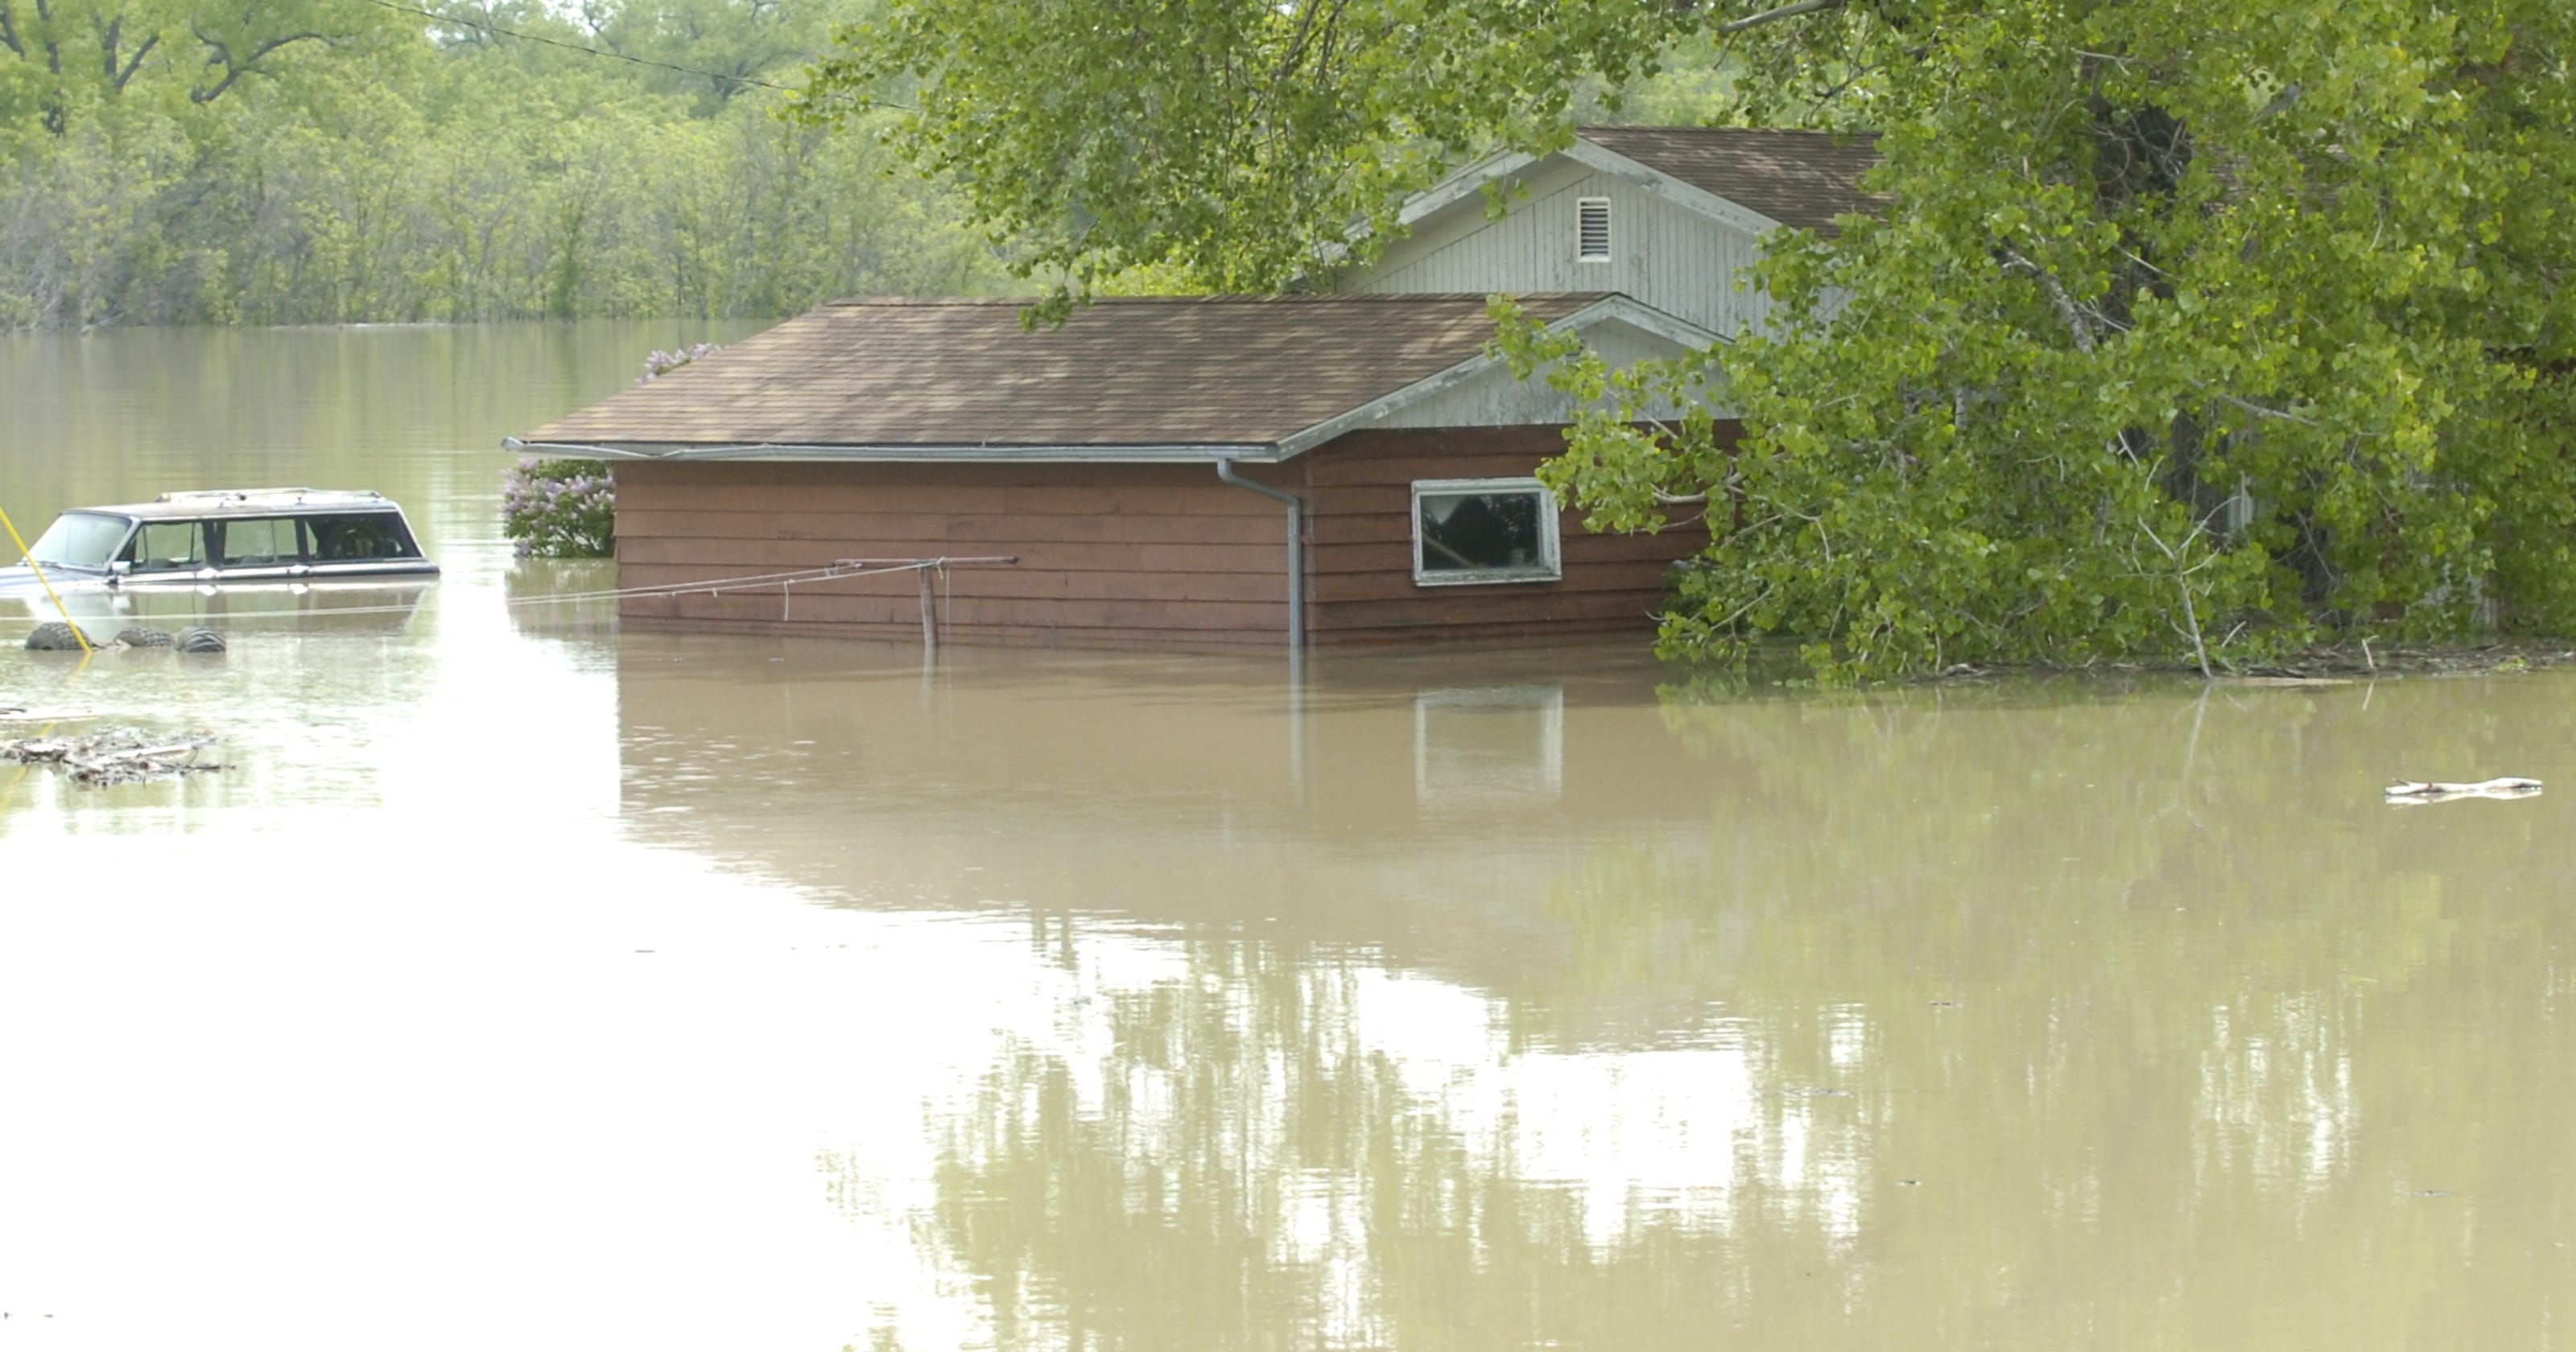 2011 After Flooding Homes Are Being Evacuated